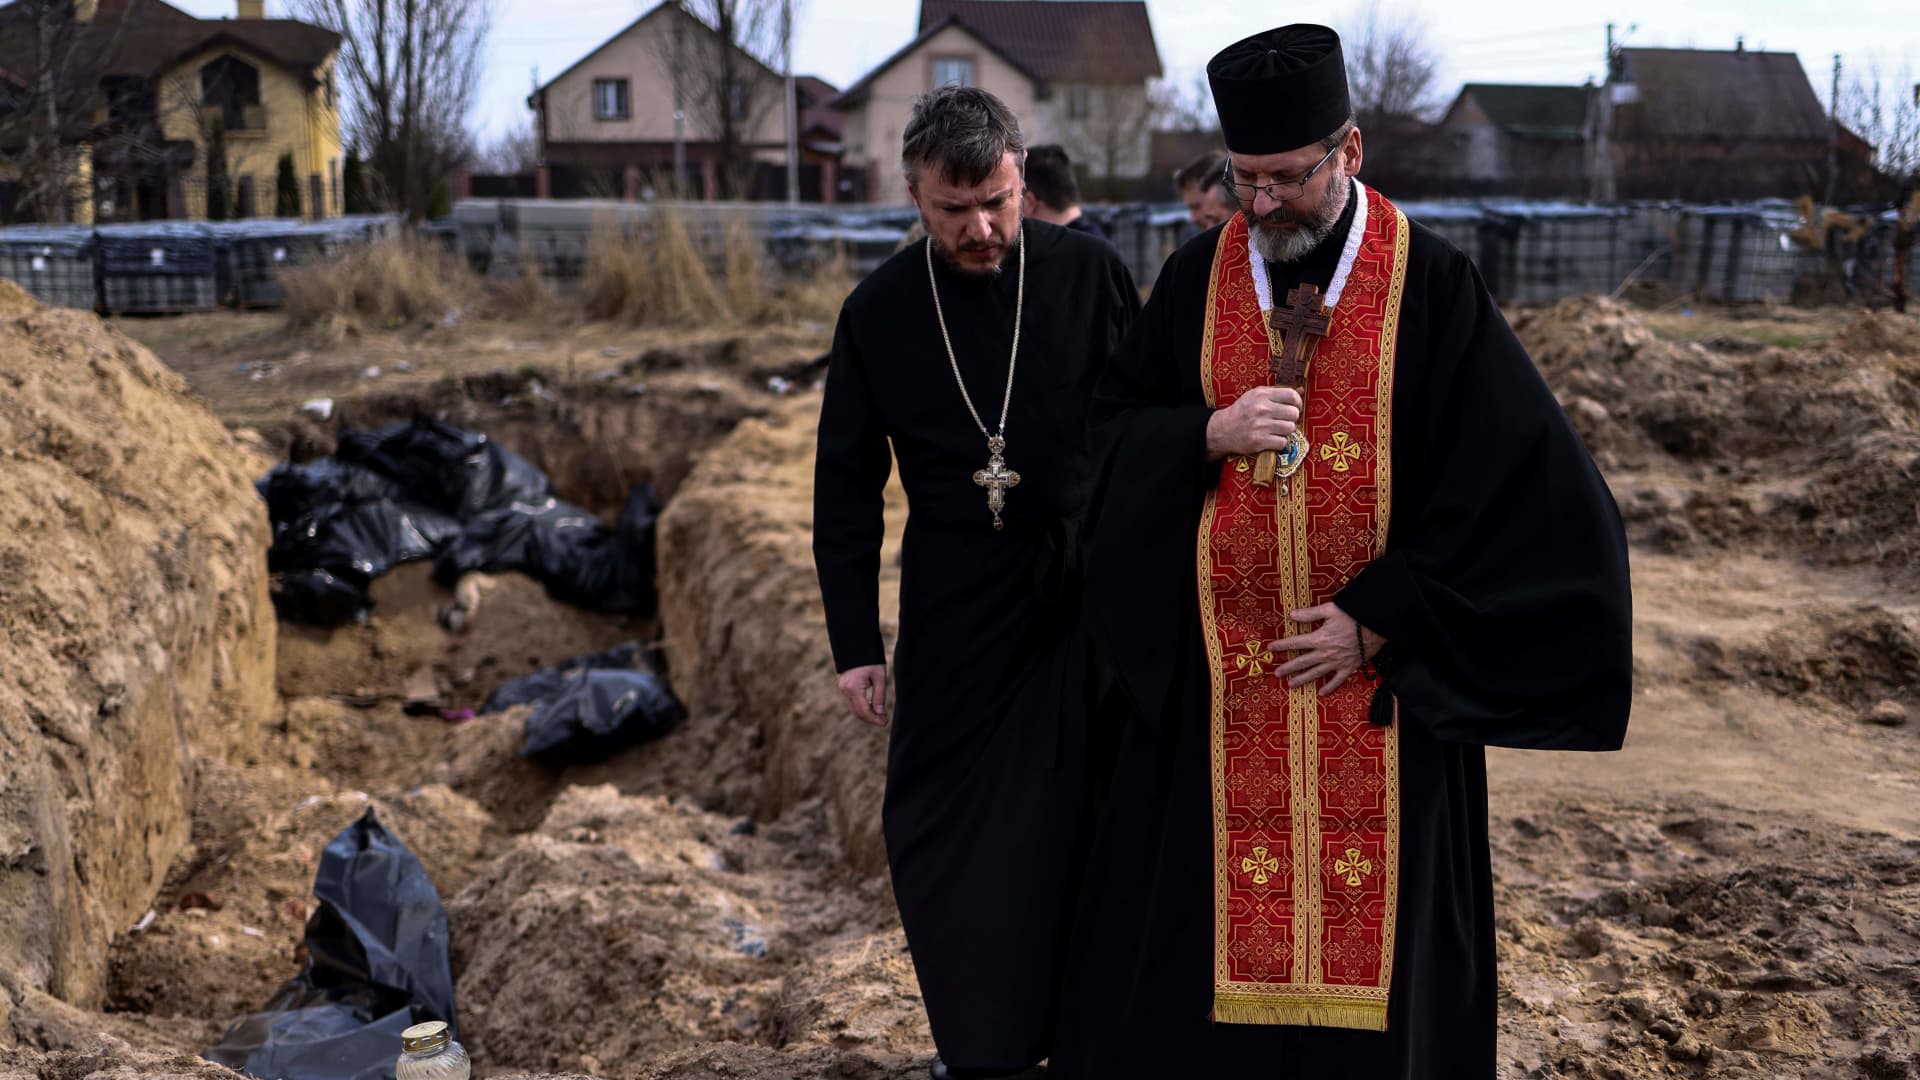 Priests pray at body bags in a mass grave in the garden surrounding the St Andrew church in Bucha, on April 7, 2022, amid Russia's military invasion launched on Ukraine.